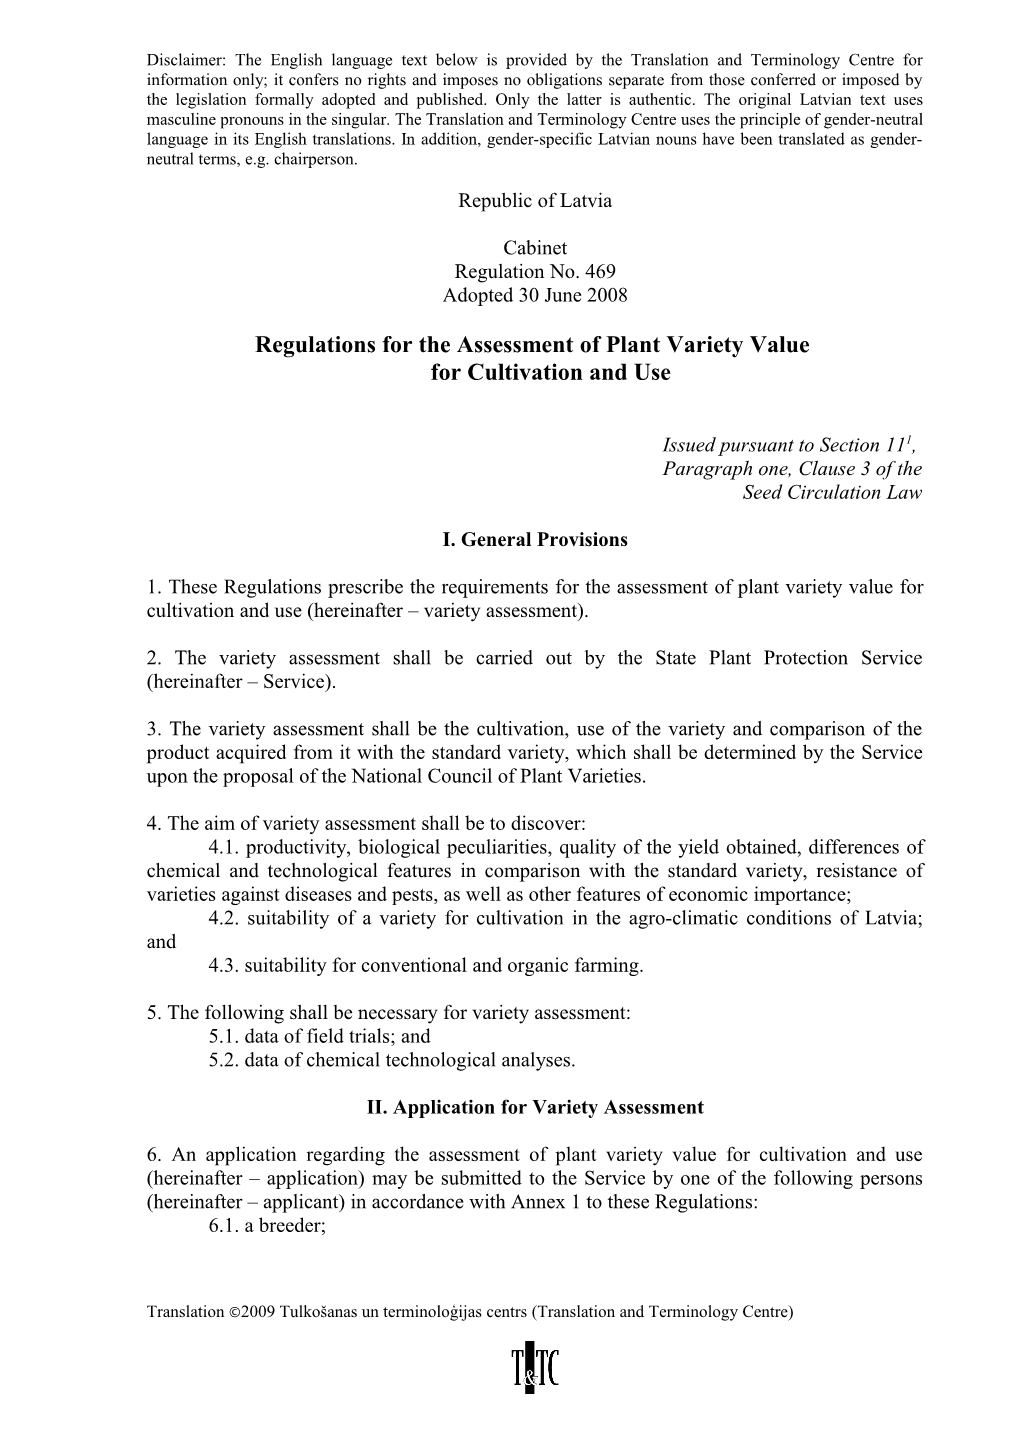 Regulations for the Assessment of Plant Variety Value for Cultivation and Use